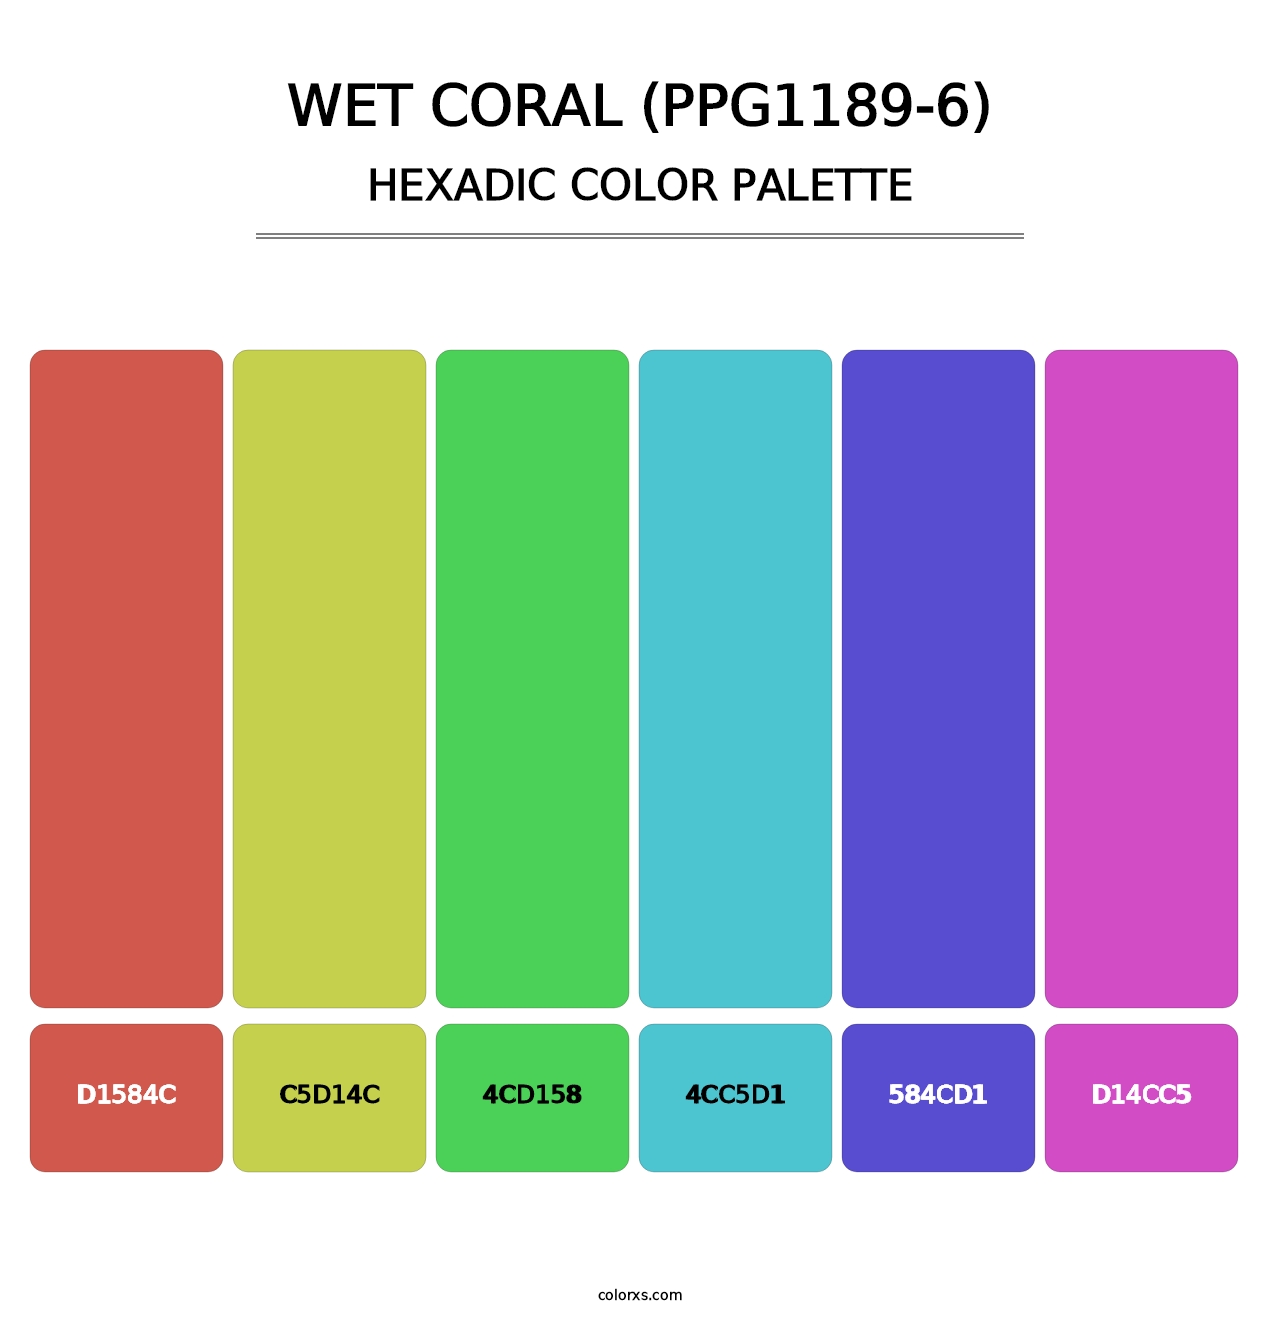 Wet Coral (PPG1189-6) - Hexadic Color Palette